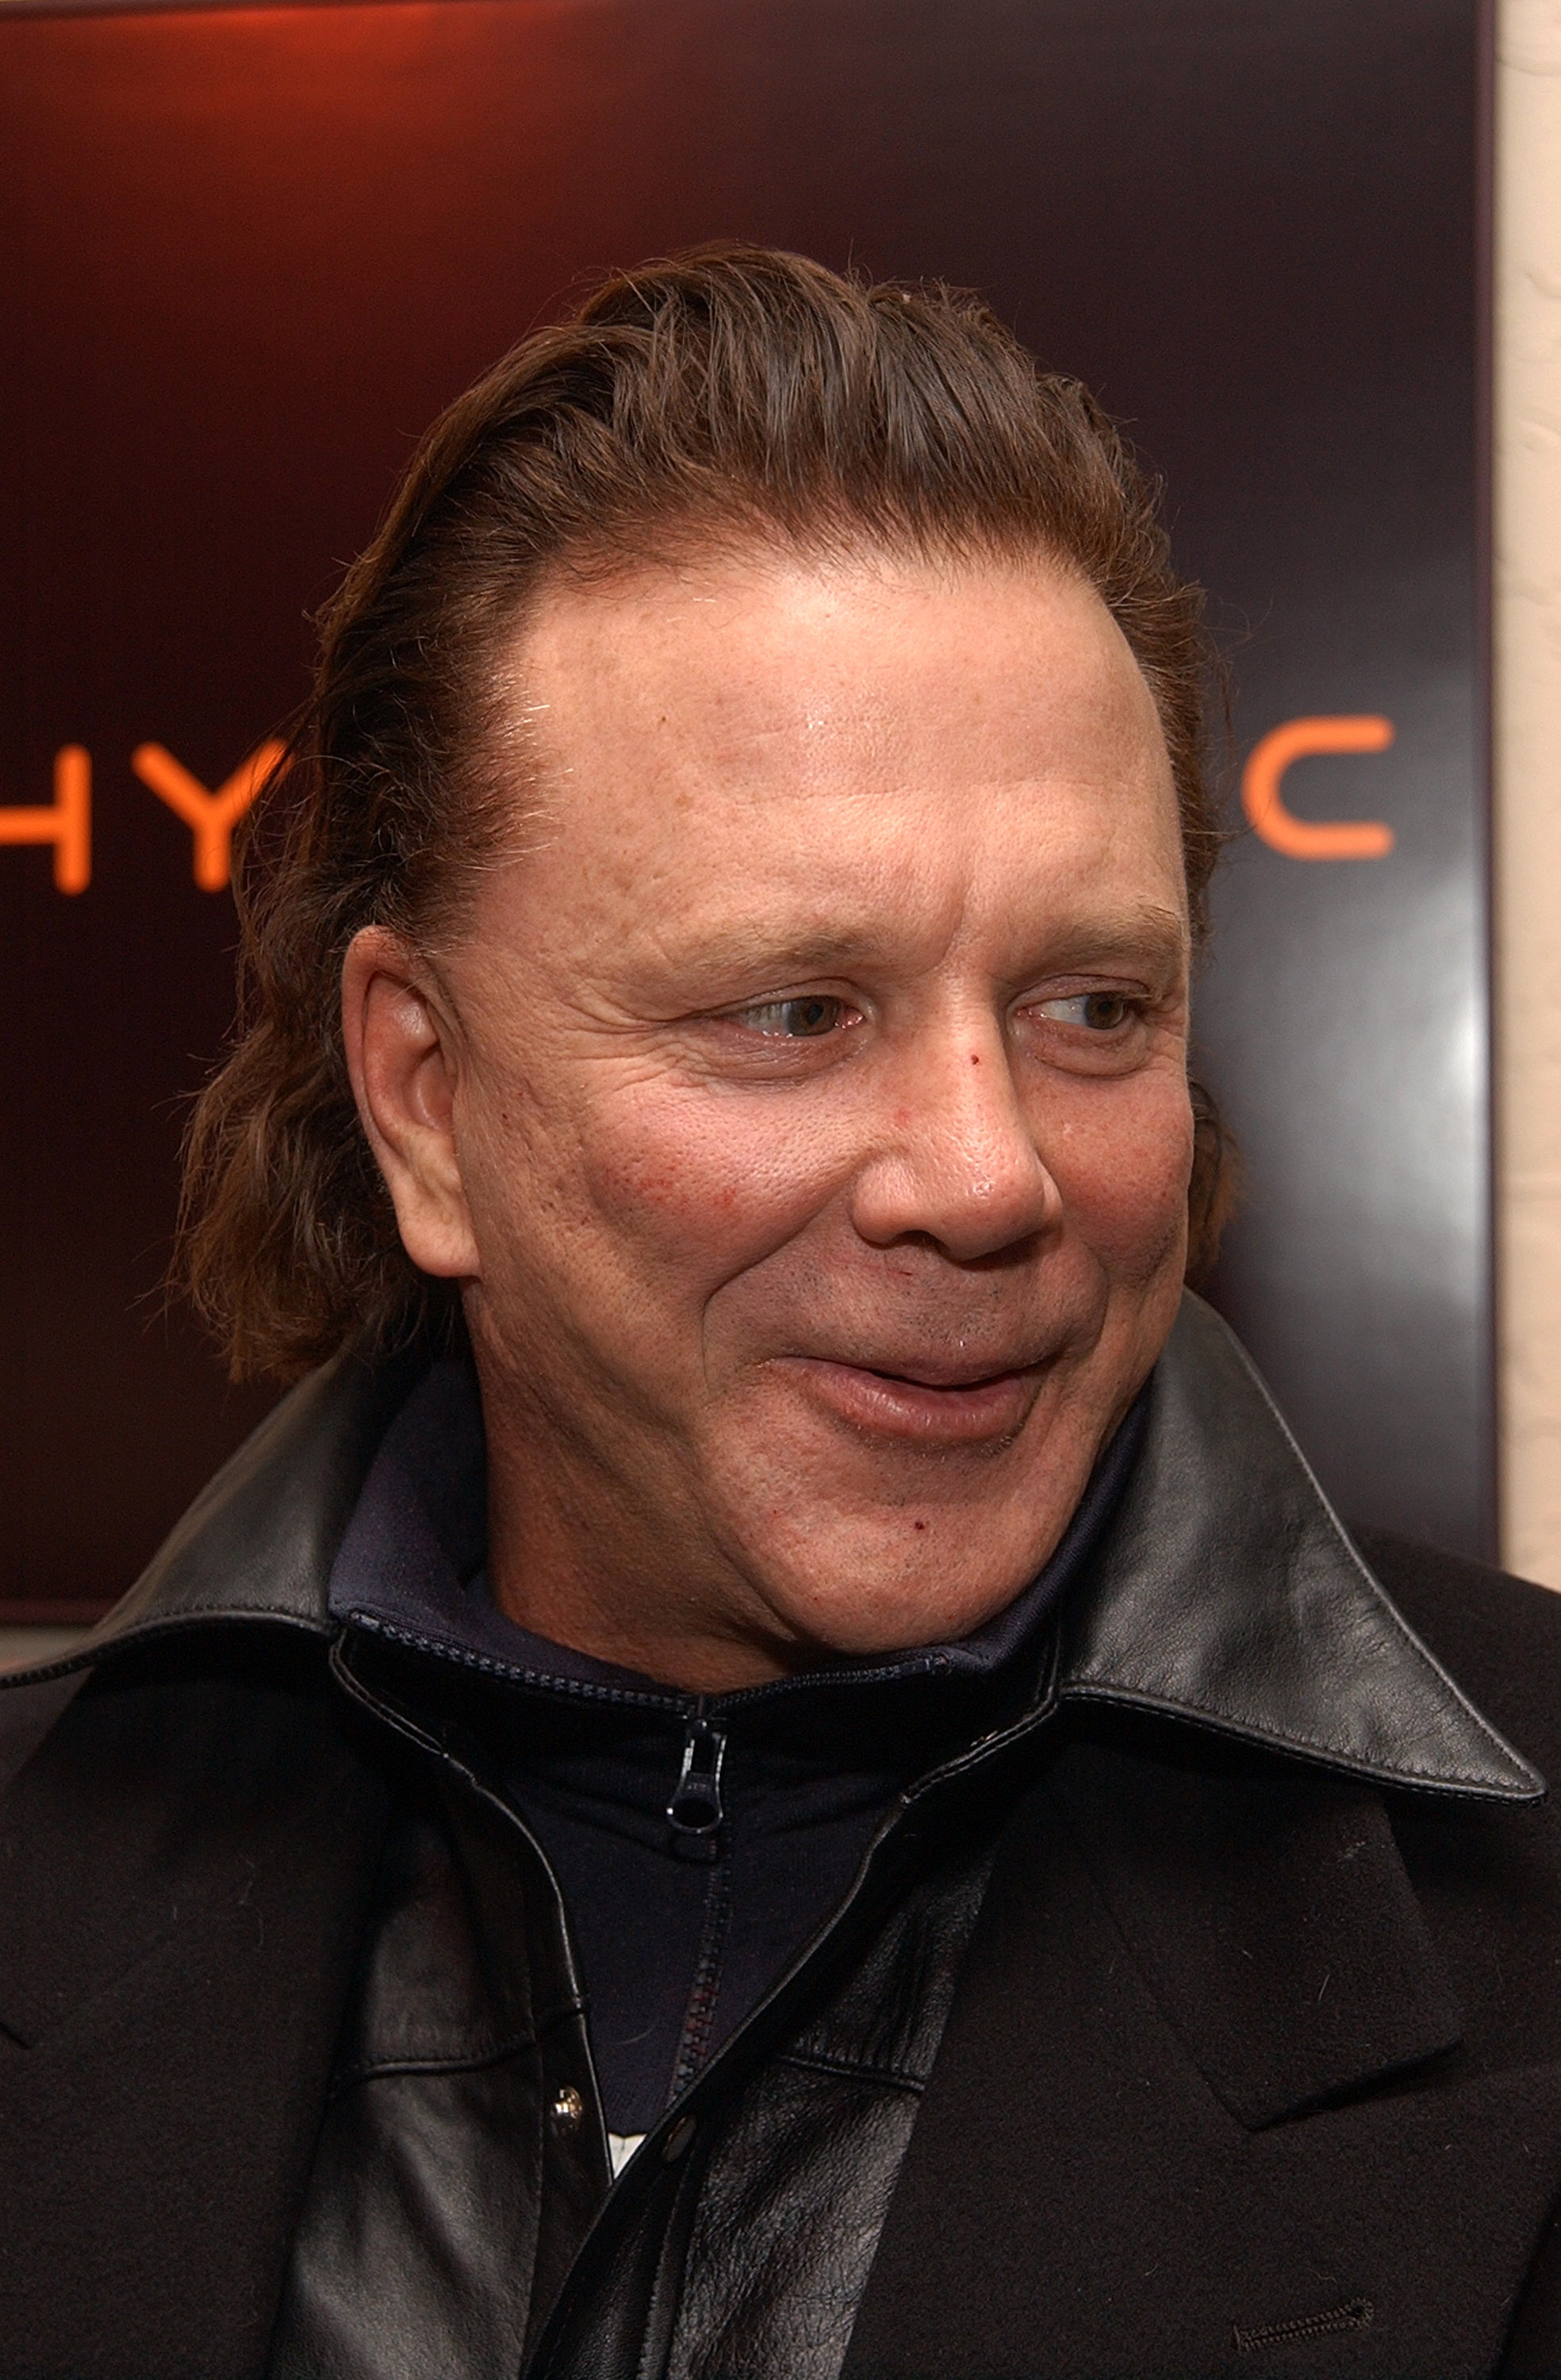 Mickey Rourke at the Chrysler Lounge at the Chrysler Million Dollar Film Festival on January 22, 2003 | Source: Getty Images